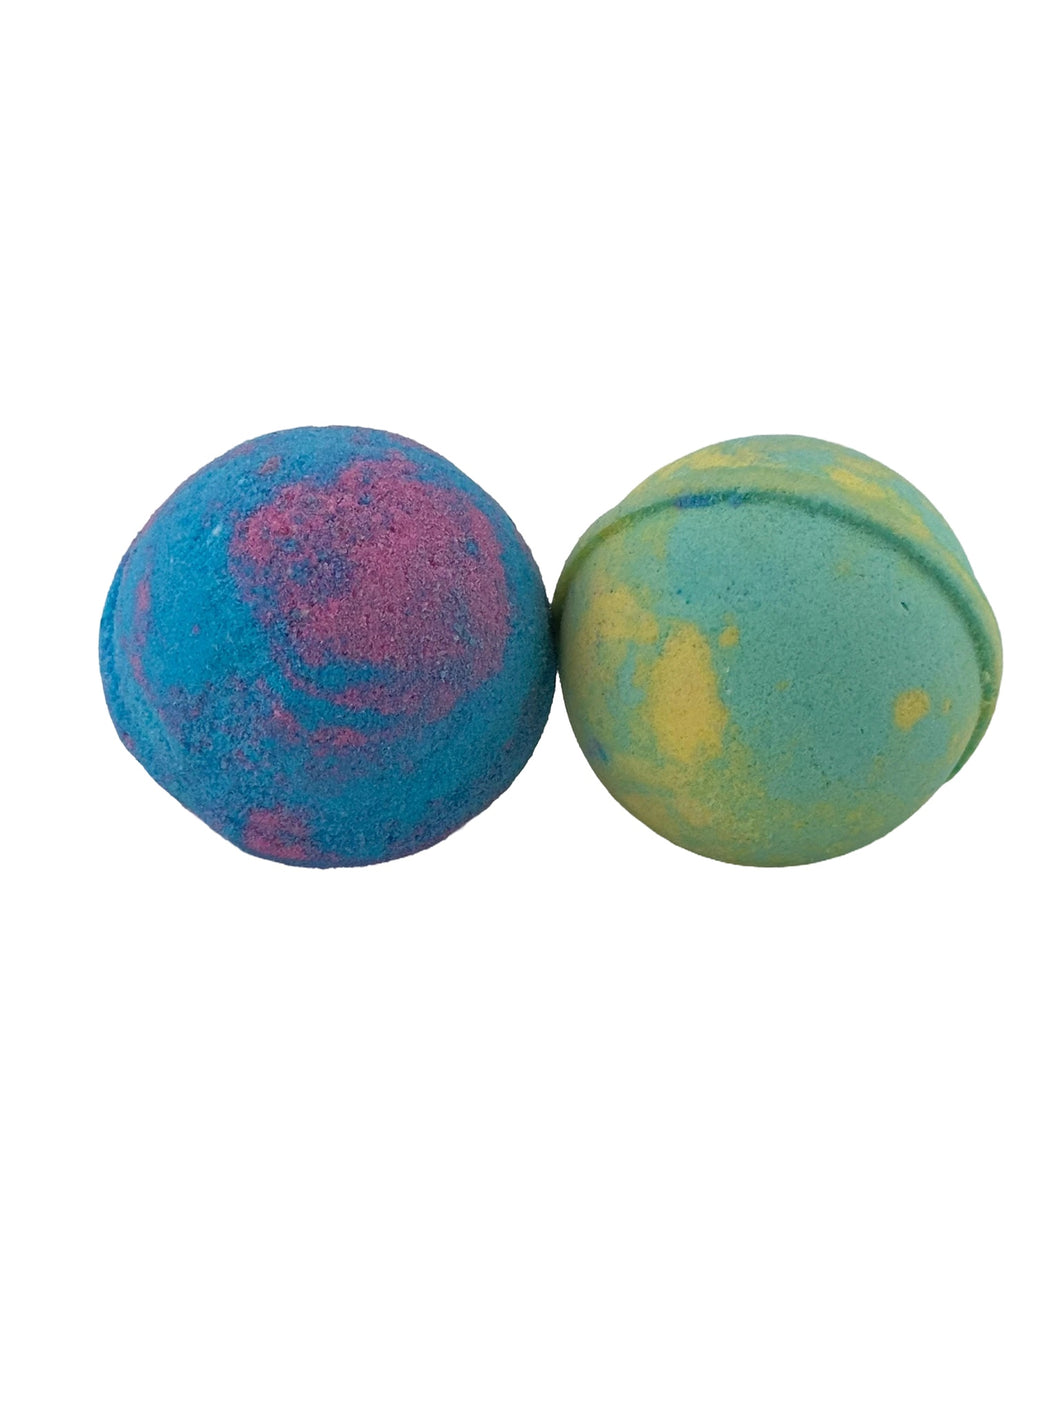 Small 45g Bath Bombs - Assorted Colours